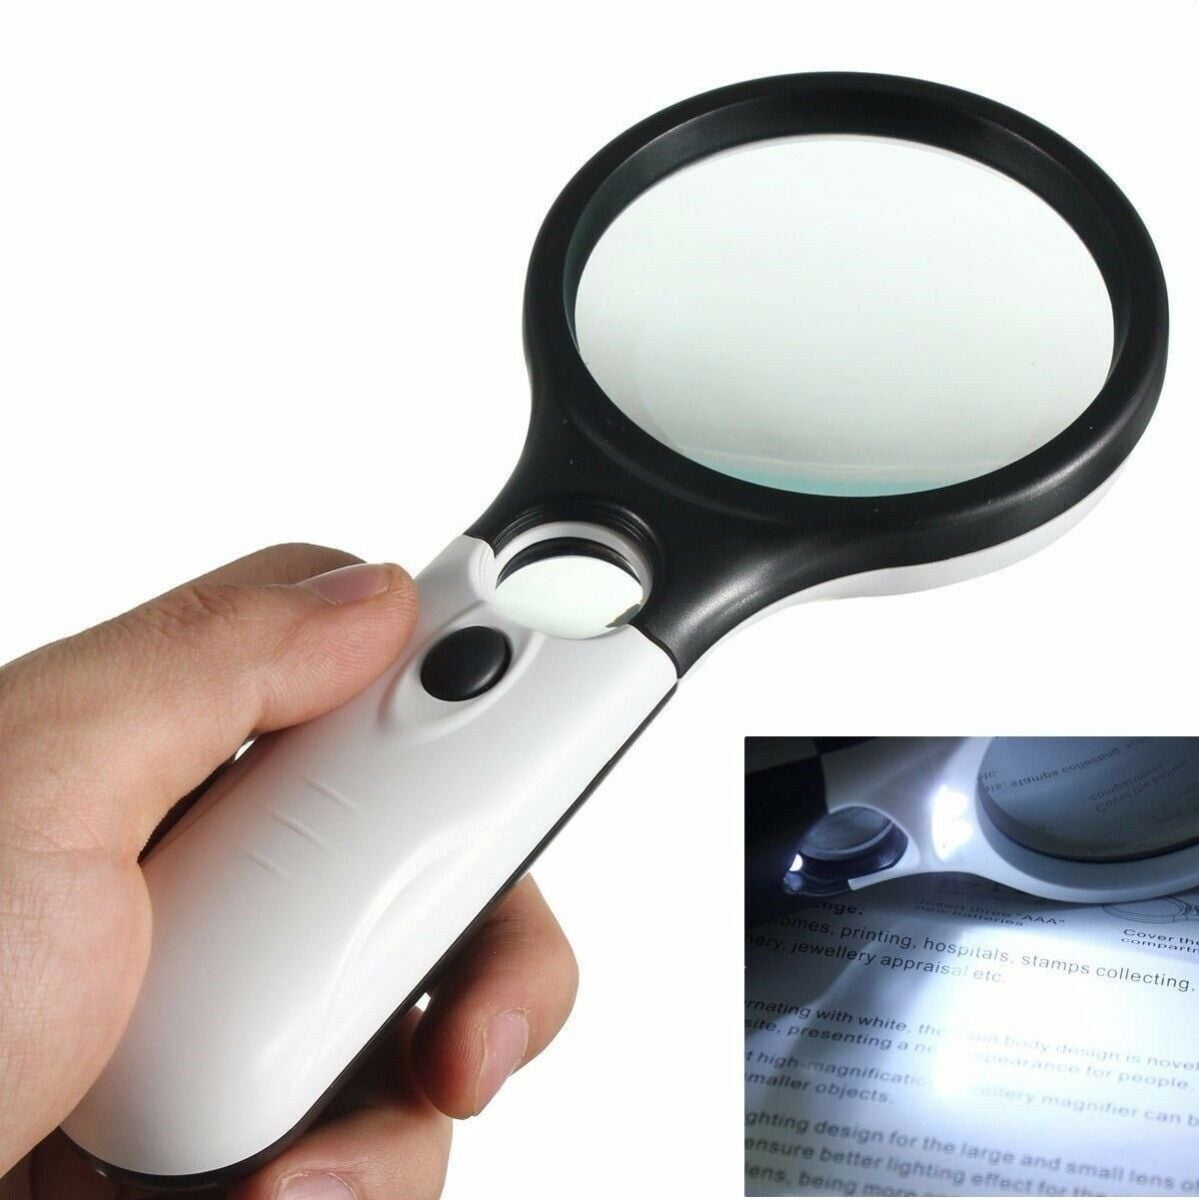 LED Magnifying Glass 2x, 3X, 45x Magnifier Lens - Handheld Magnifying Glass  with Light for Reading Small Prints, map, Coins and Jewelry 